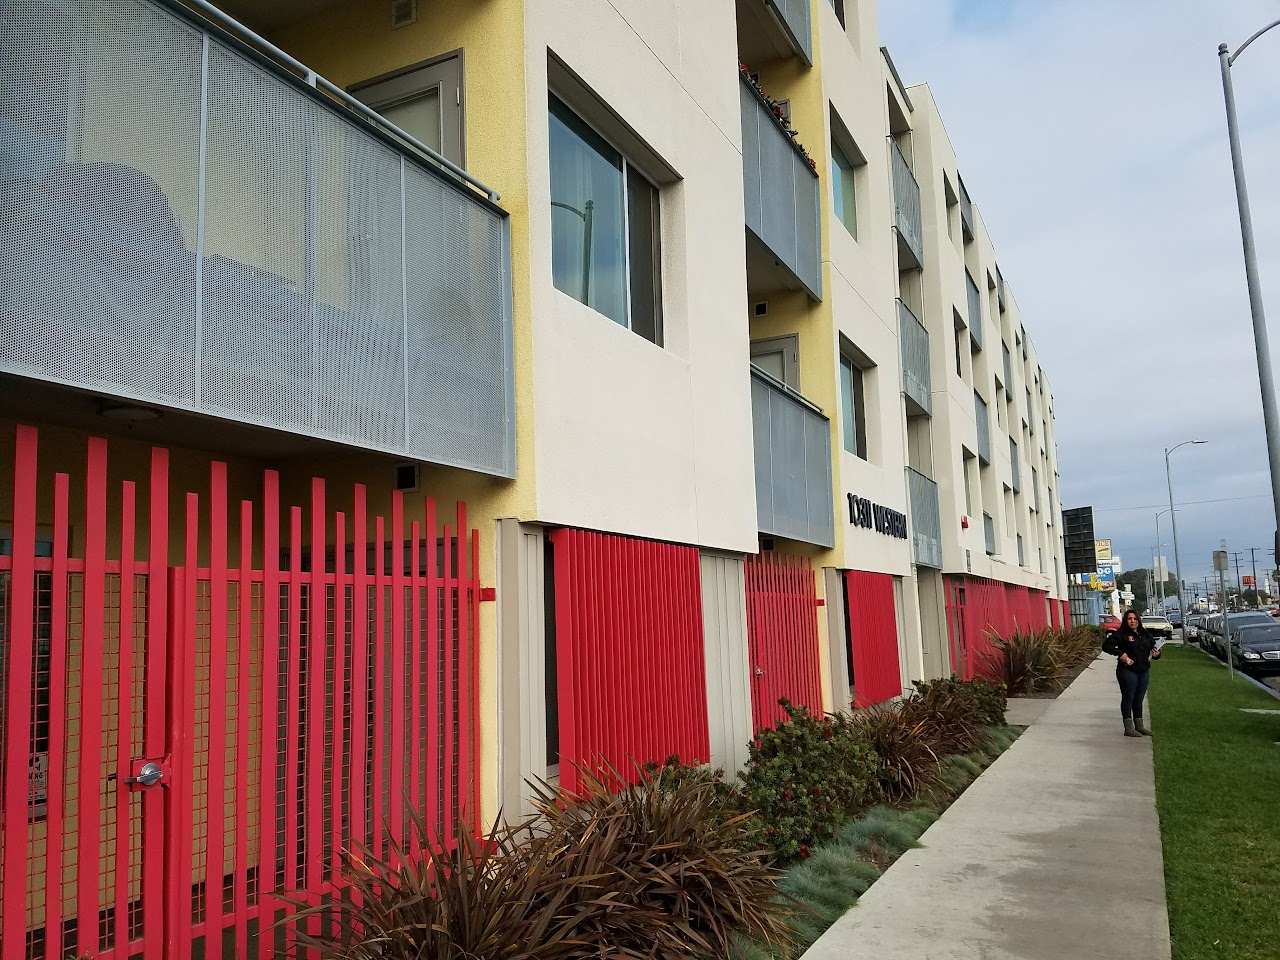 Photo of LA PRO II APTS. Affordable housing located at 10311 S WESTERN AVE LOS ANGELES, CA 90047